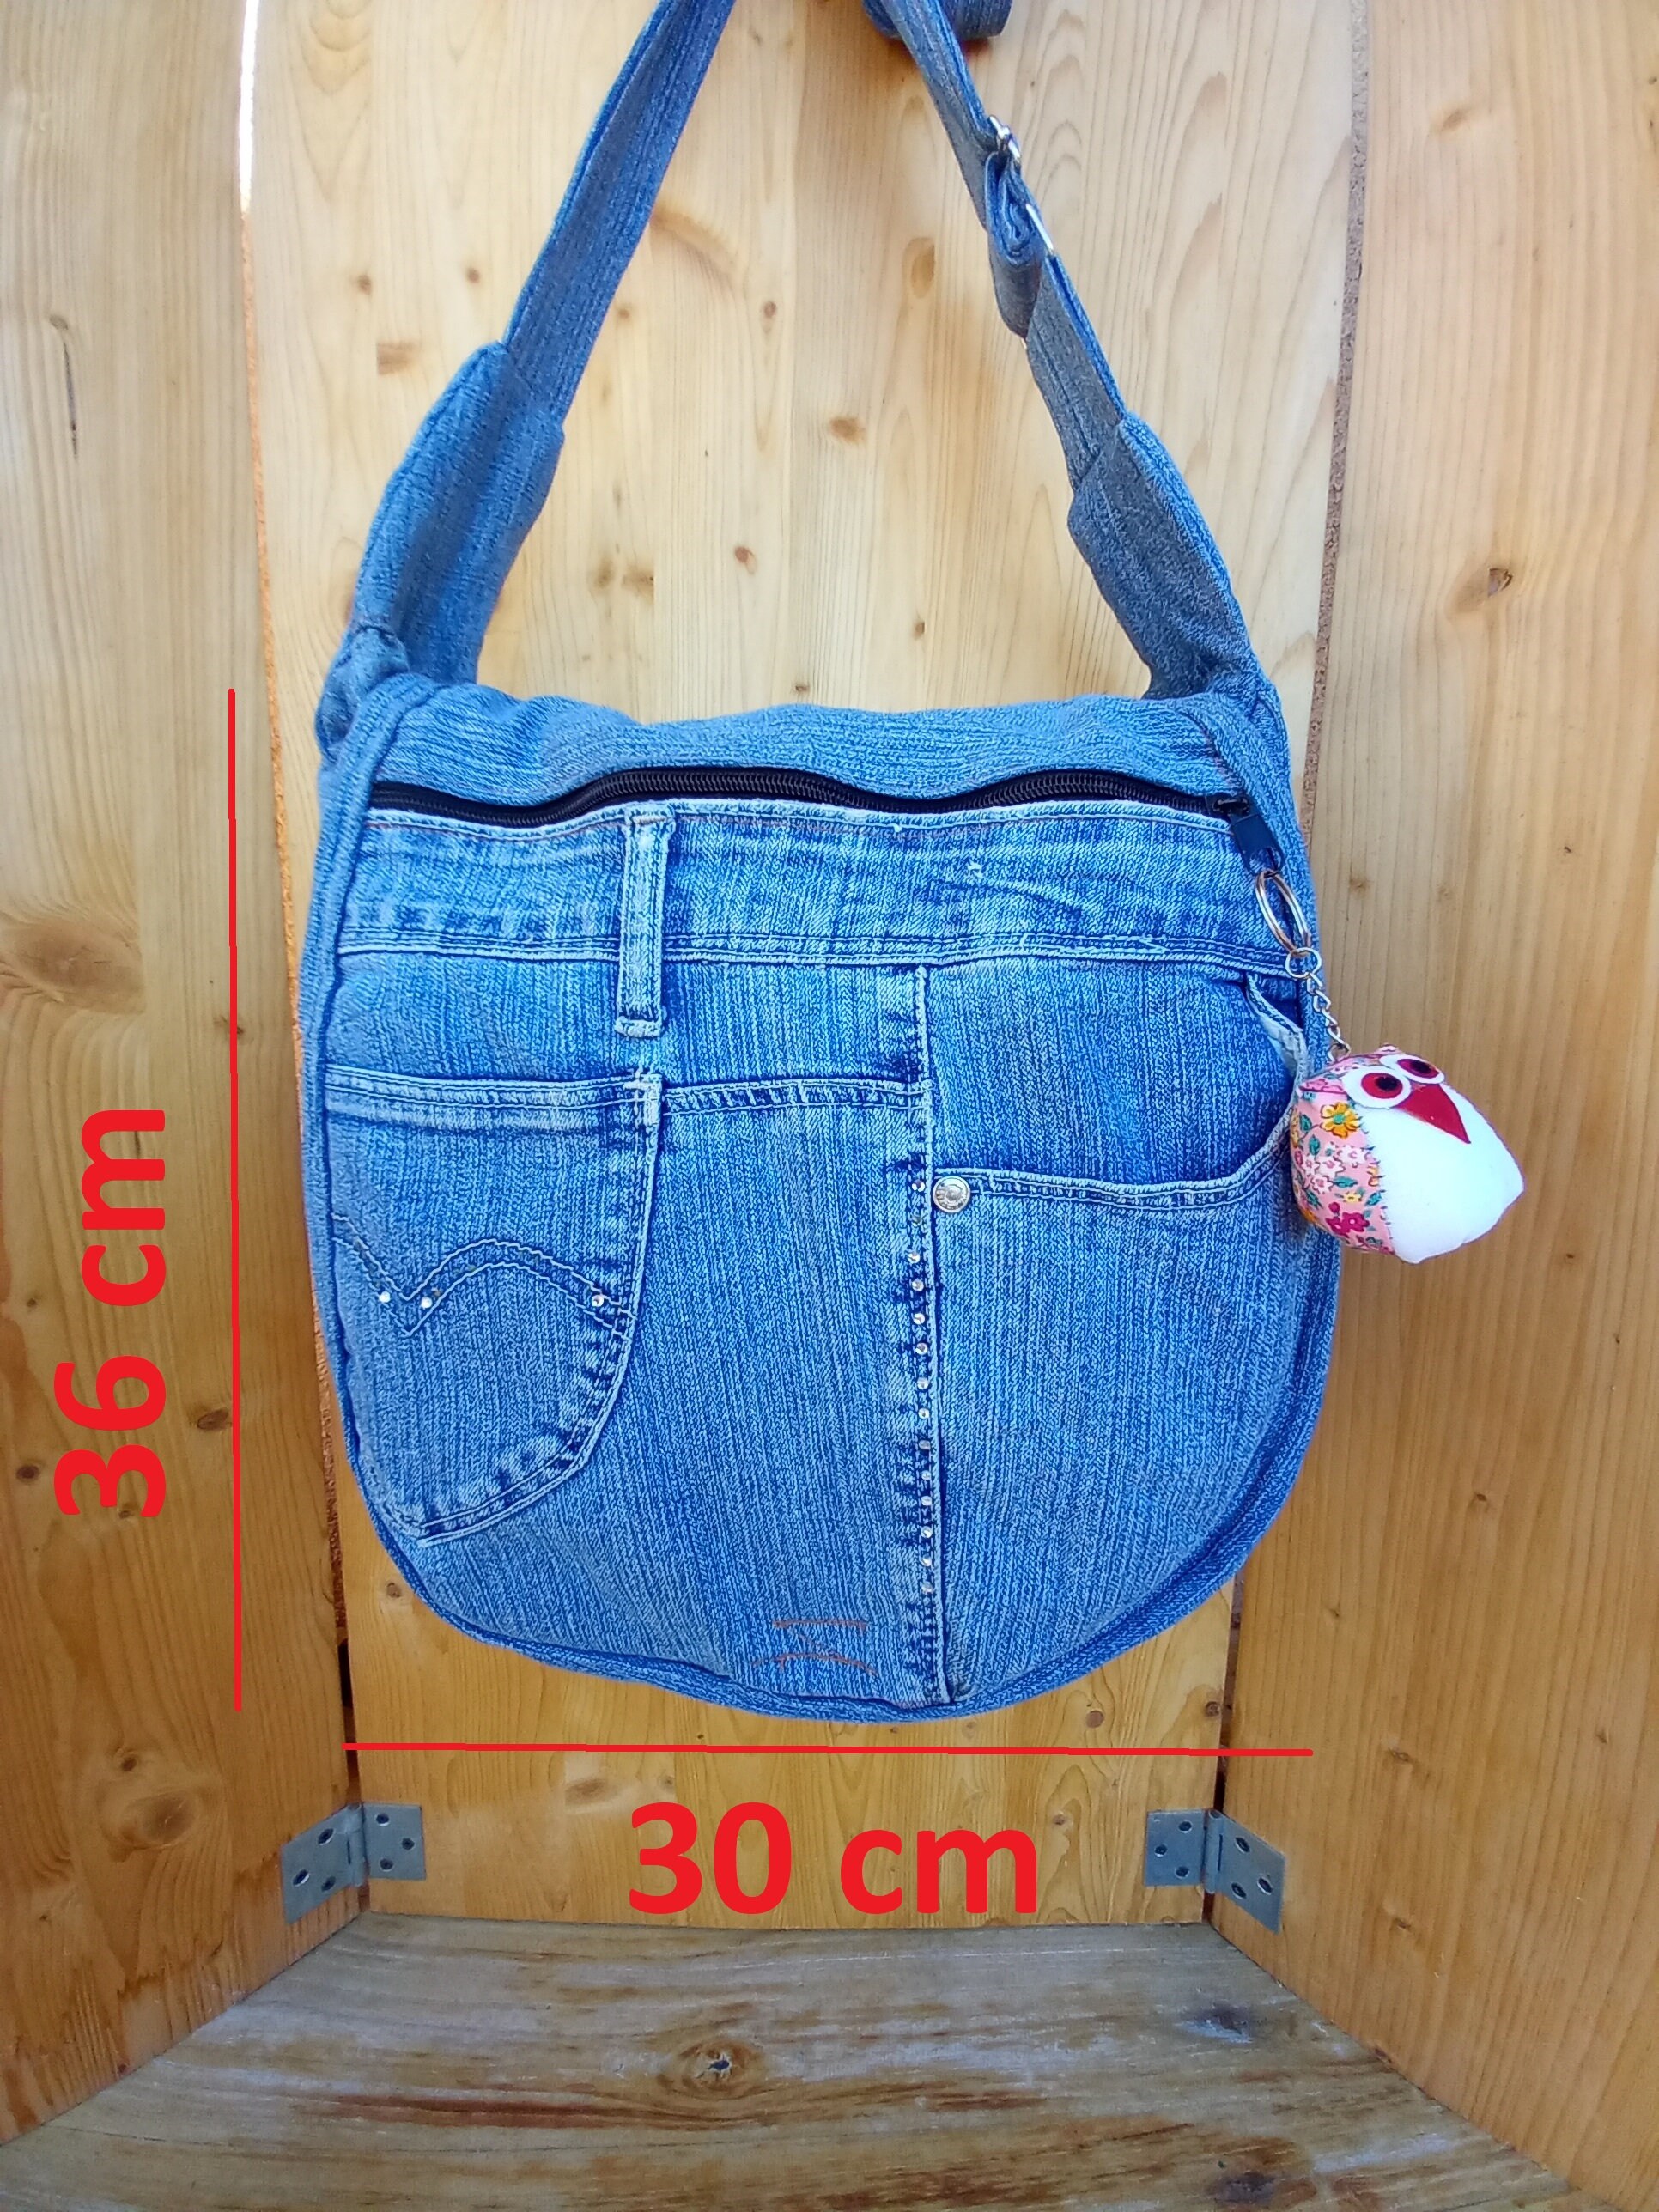 Denim Bags | Upcycled From Jeans – The Sustainability Project